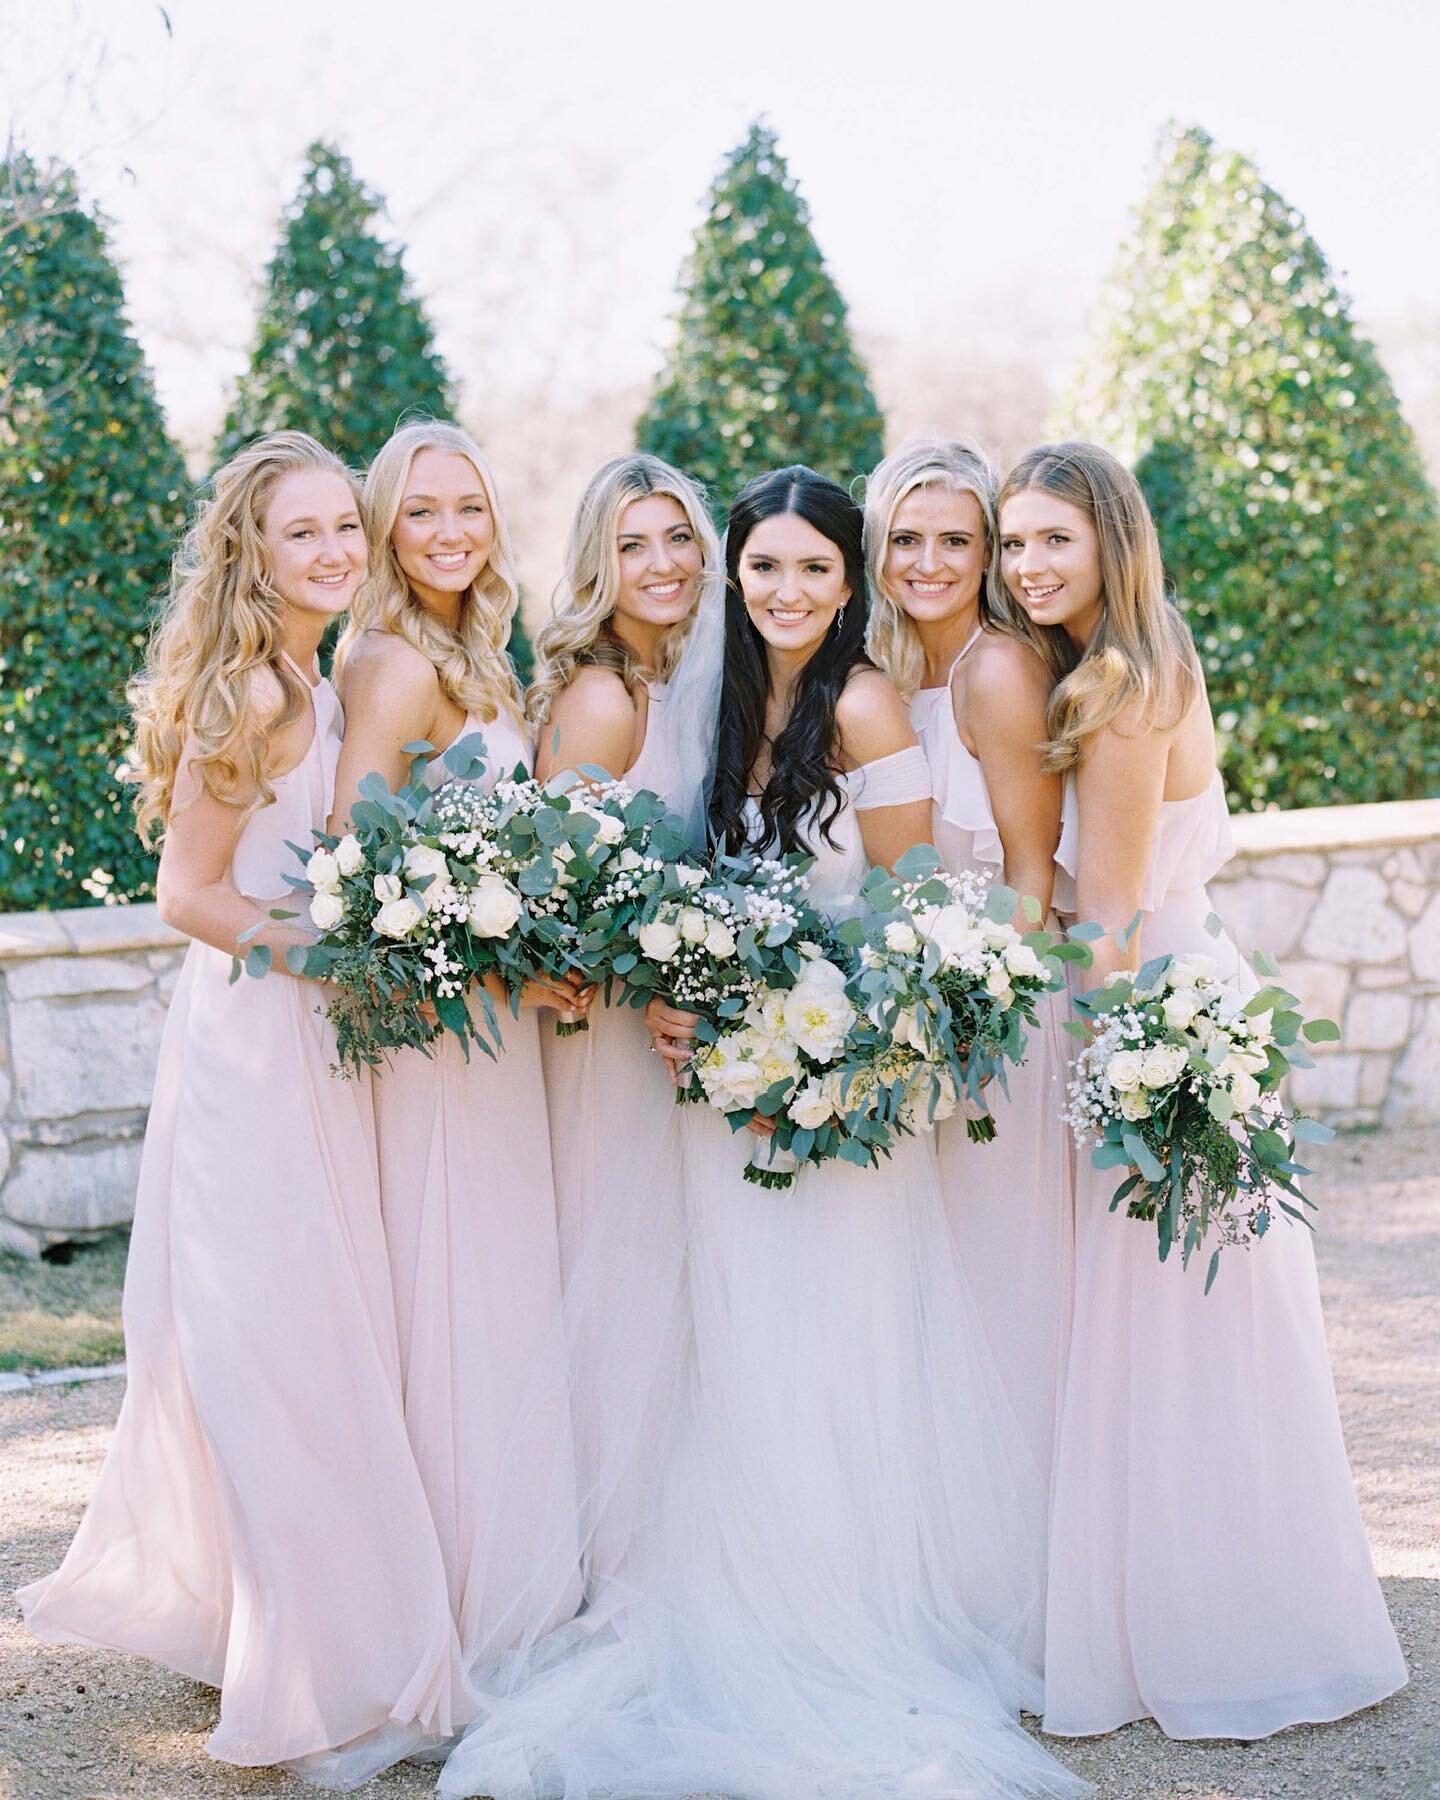 every blonde needs a brunette bestie!

we have a team of artists that can accommodate larger bridal parties, so whether you have two or ten, we&rsquo;ve got you! 

hope everyone has a wonderful weekend 🥂